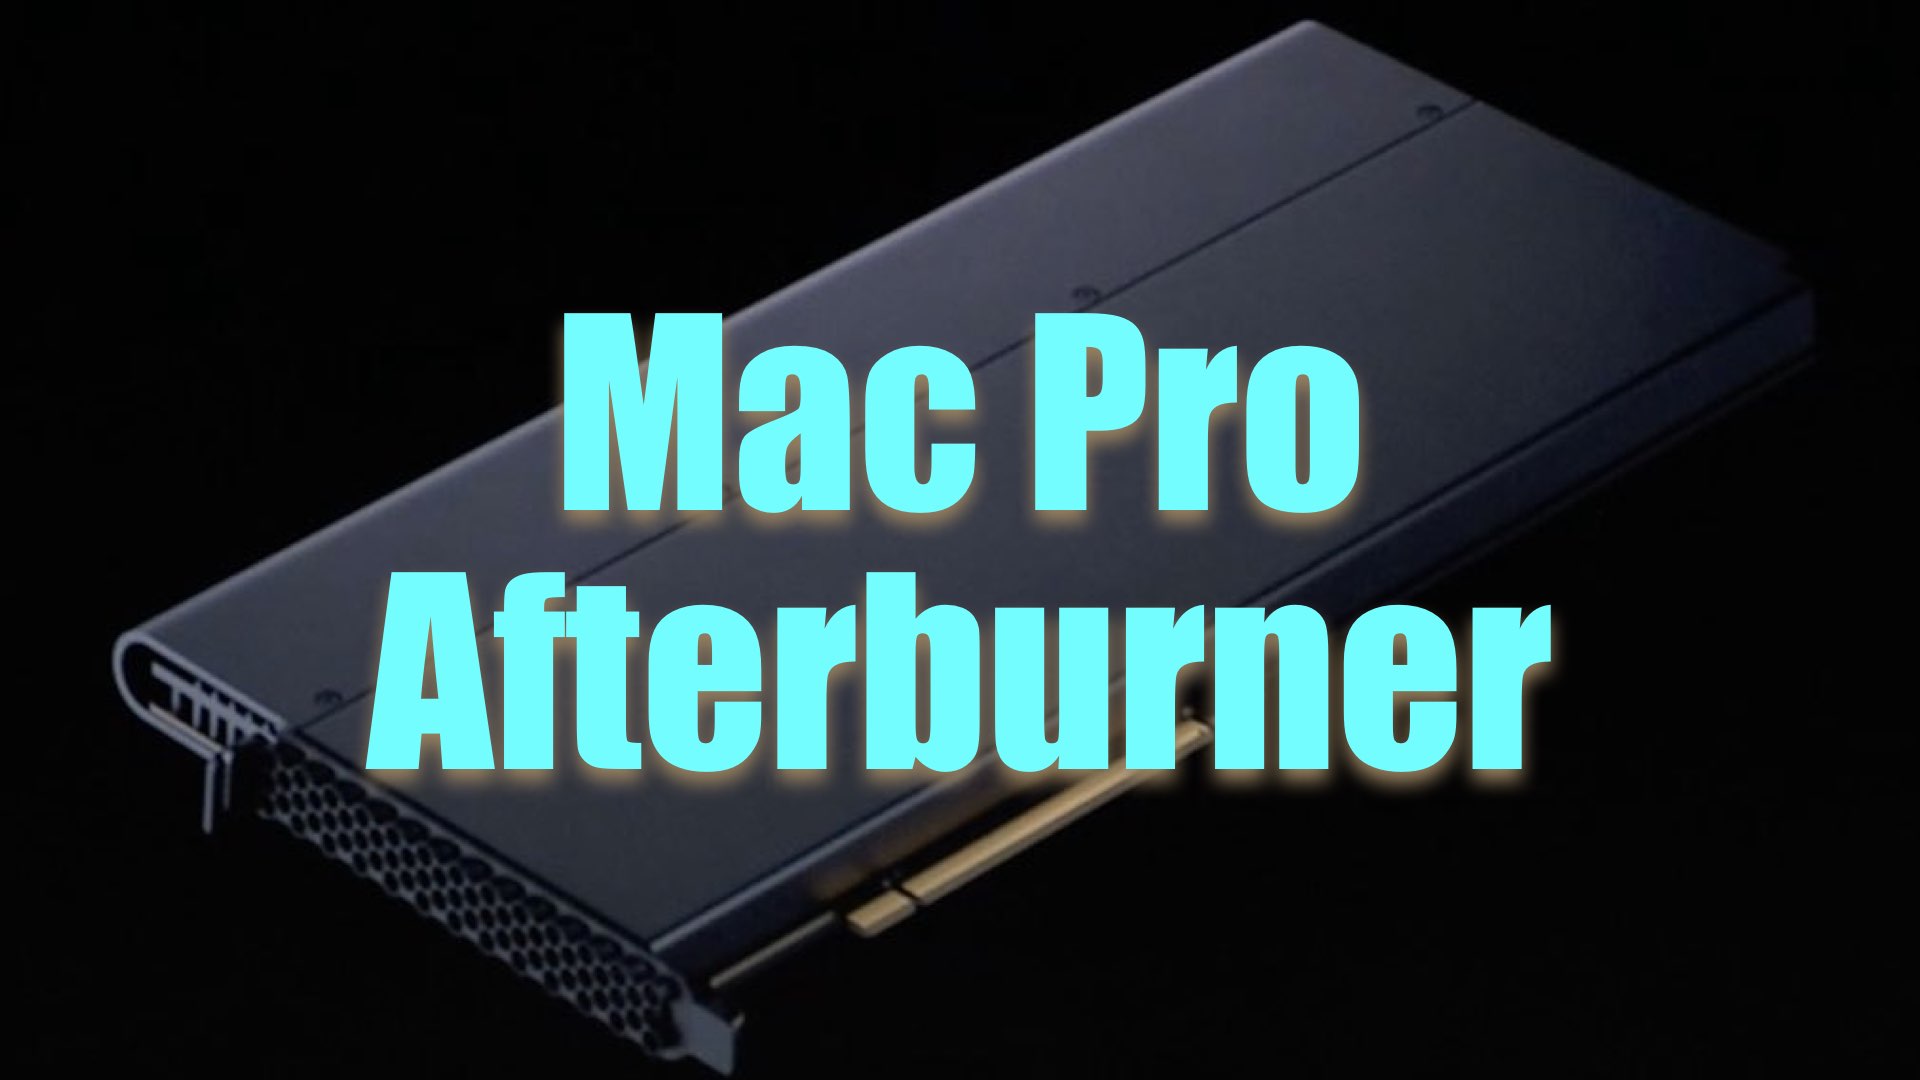 4k video card for mac pro